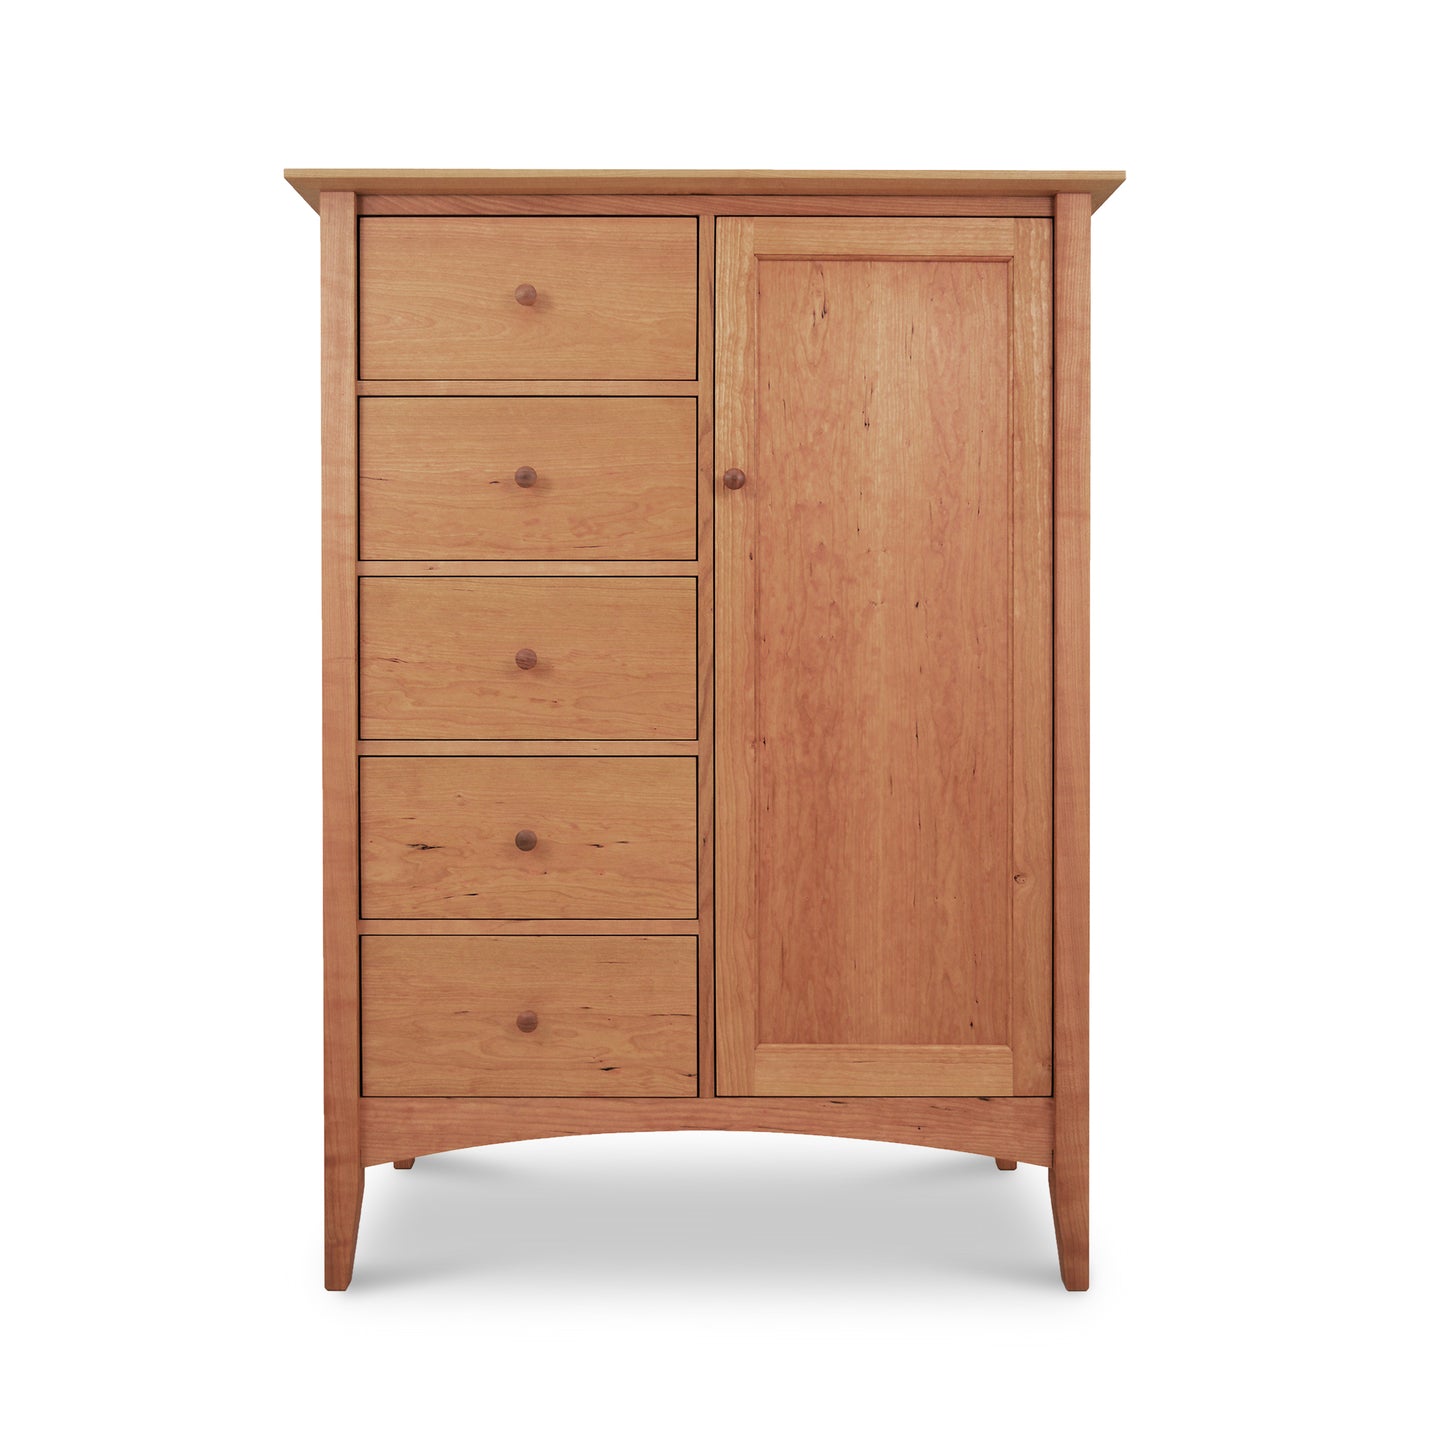 An image of an American Shaker Sweater Chest by Maple Corner Woodworks with drawers.